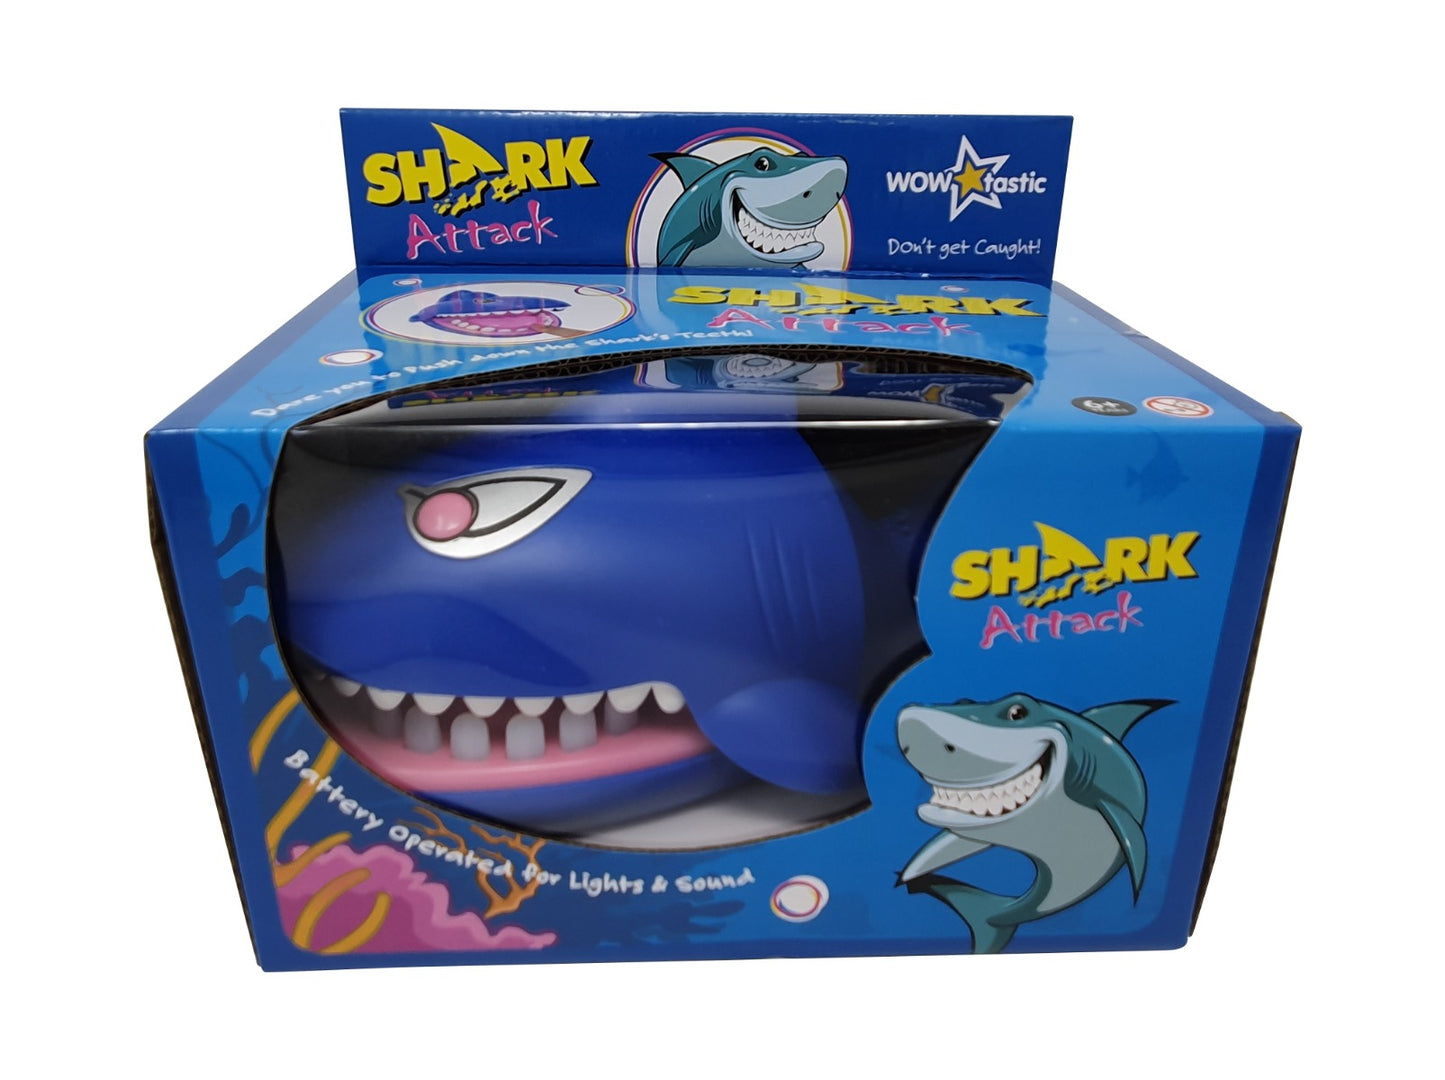 Shark Attack Toy Game with lights and sound